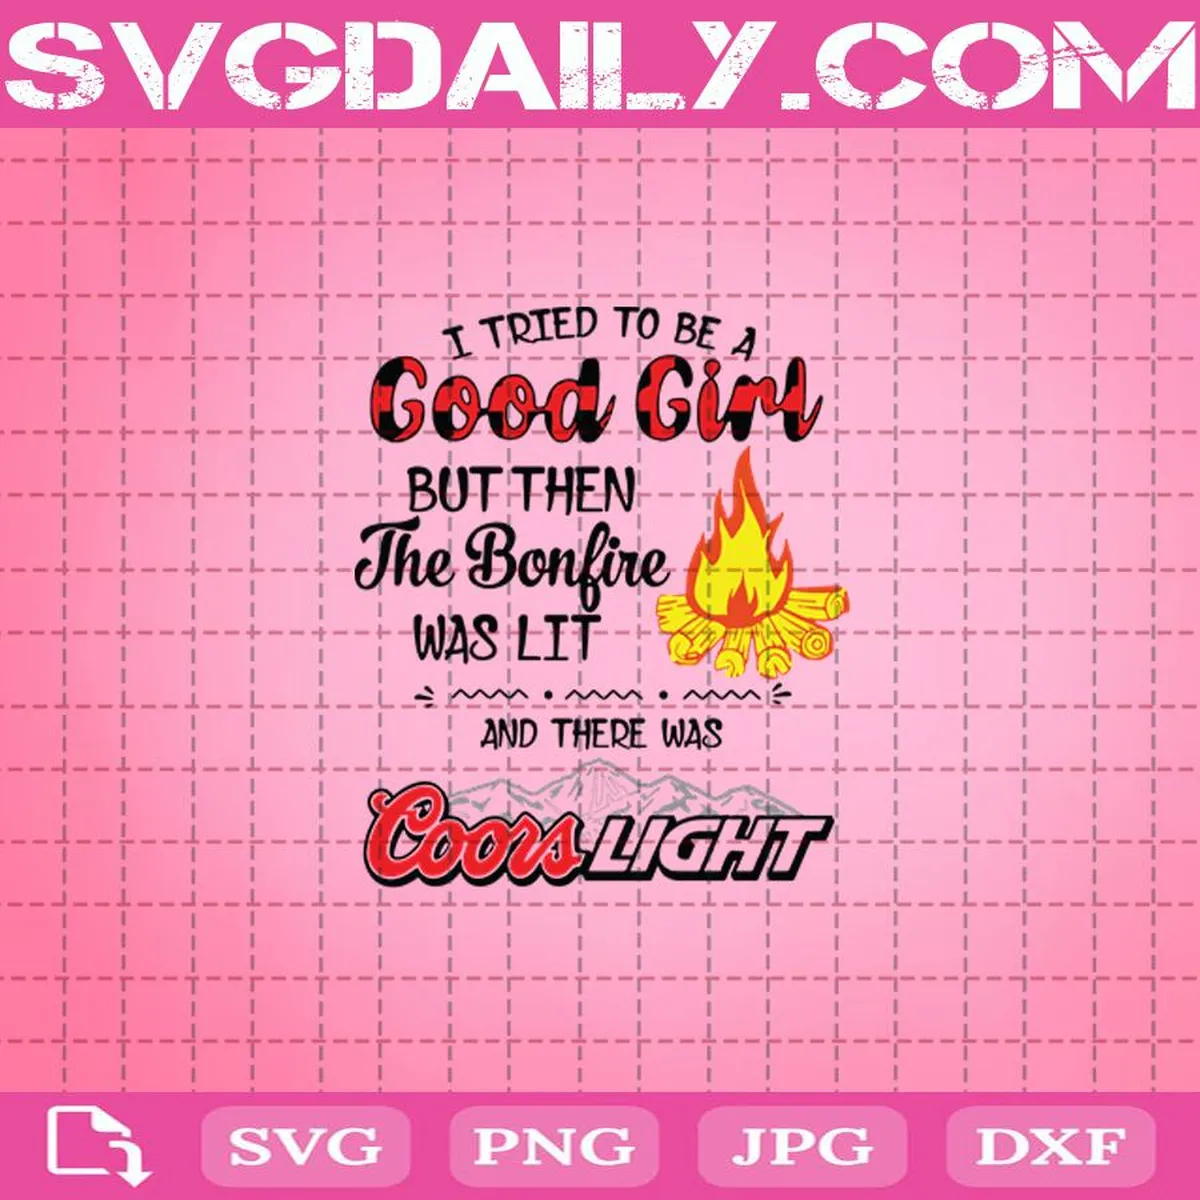 I Tried To Be A Good Girl But Then The Bonfire Was Lit And There Was Coors Light Svg, Camping Bonfire Campfire Svg, Coors Light Beer Svg